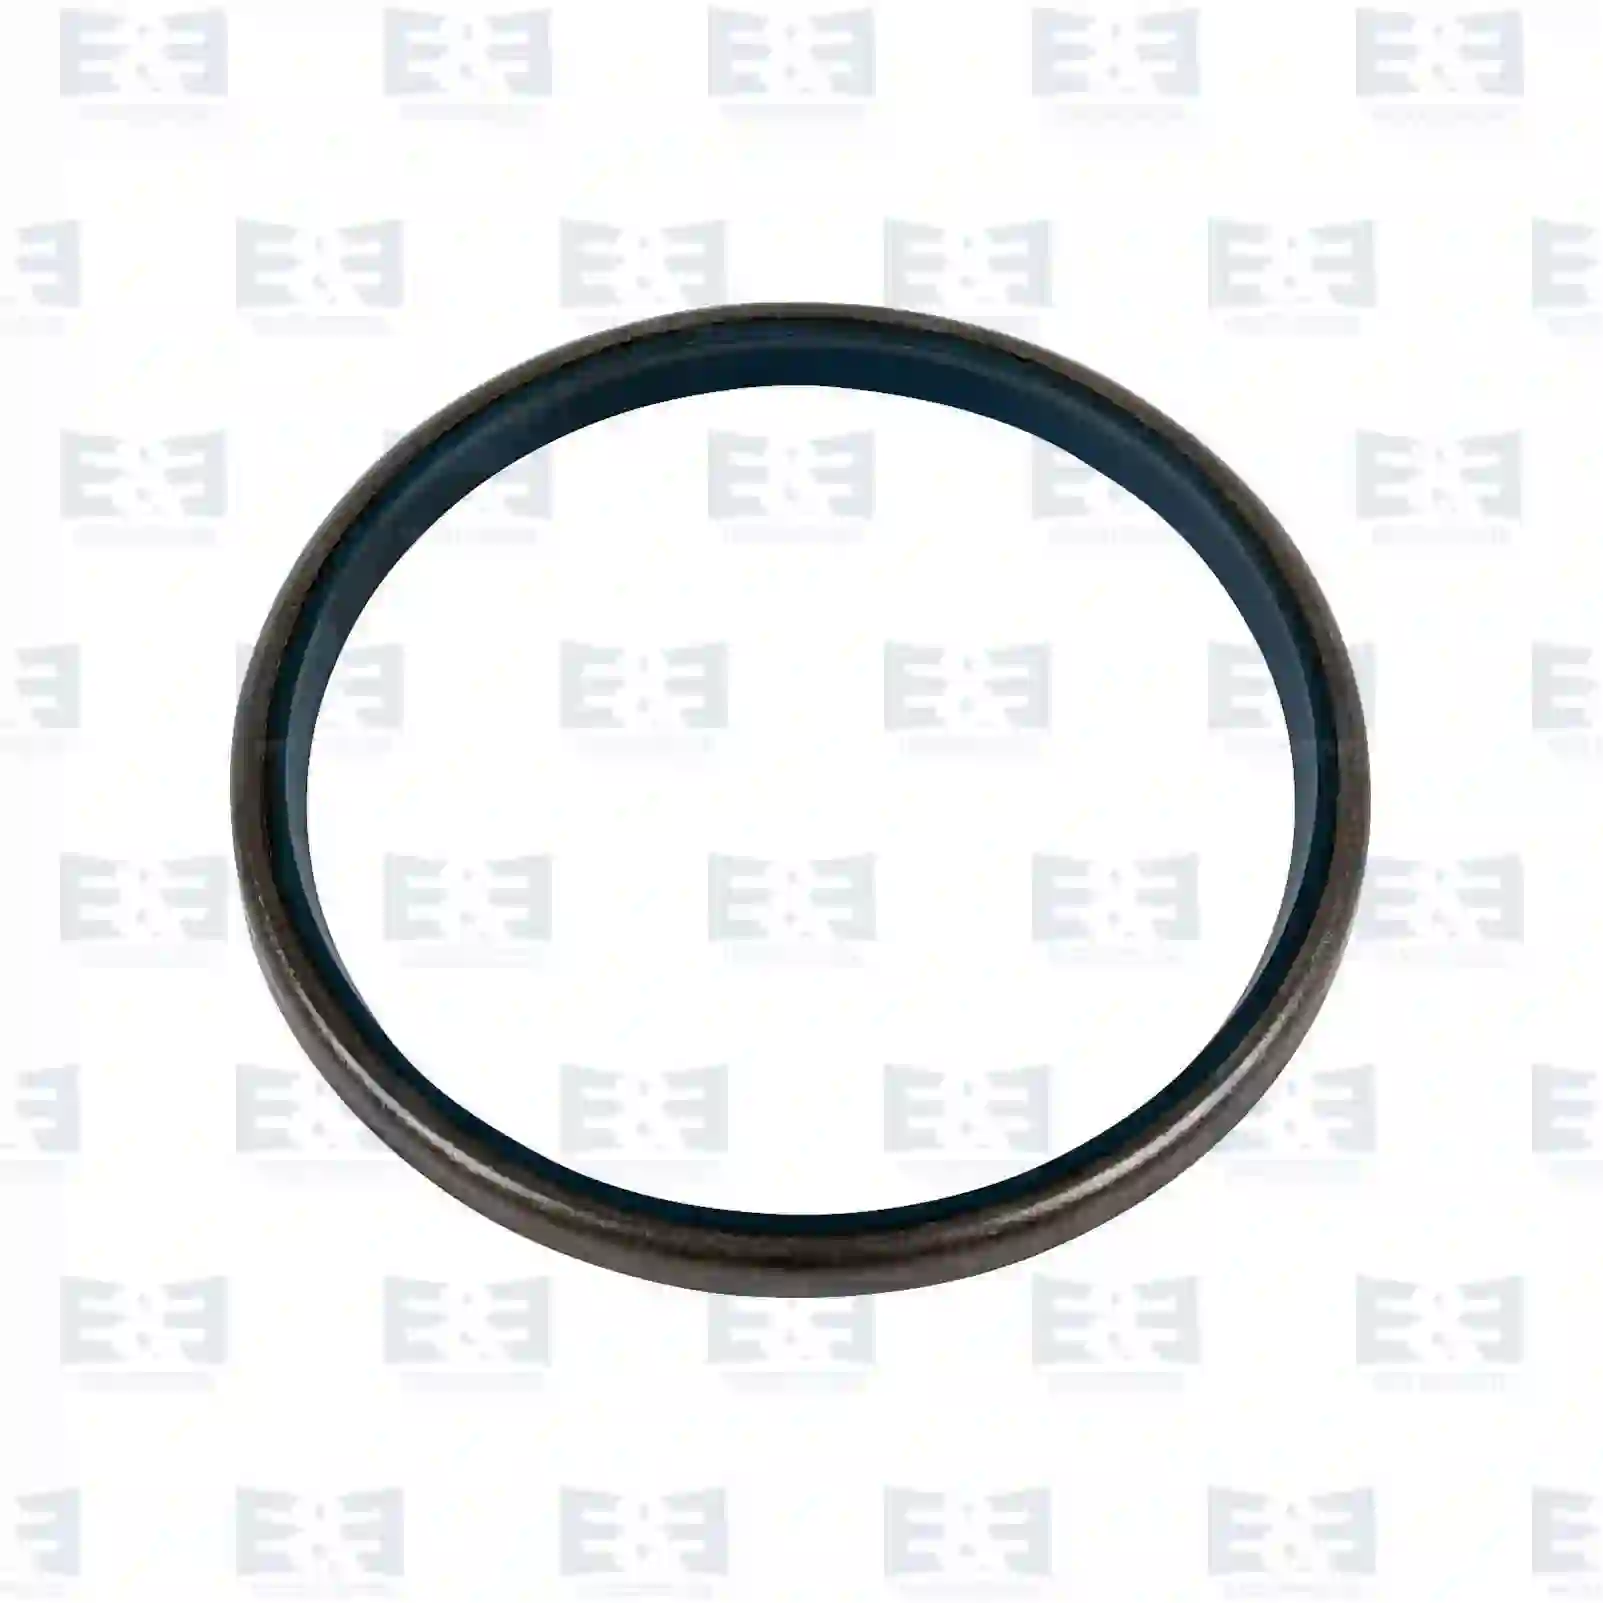 Steering Knuckle Seal ring, EE No 2E2270733 ,  oem no:06562790218, 06562790219, 06562790221, 0069977147, 0079974847, 0079977547 E&E Truck Spare Parts | Truck Spare Parts, Auotomotive Spare Parts